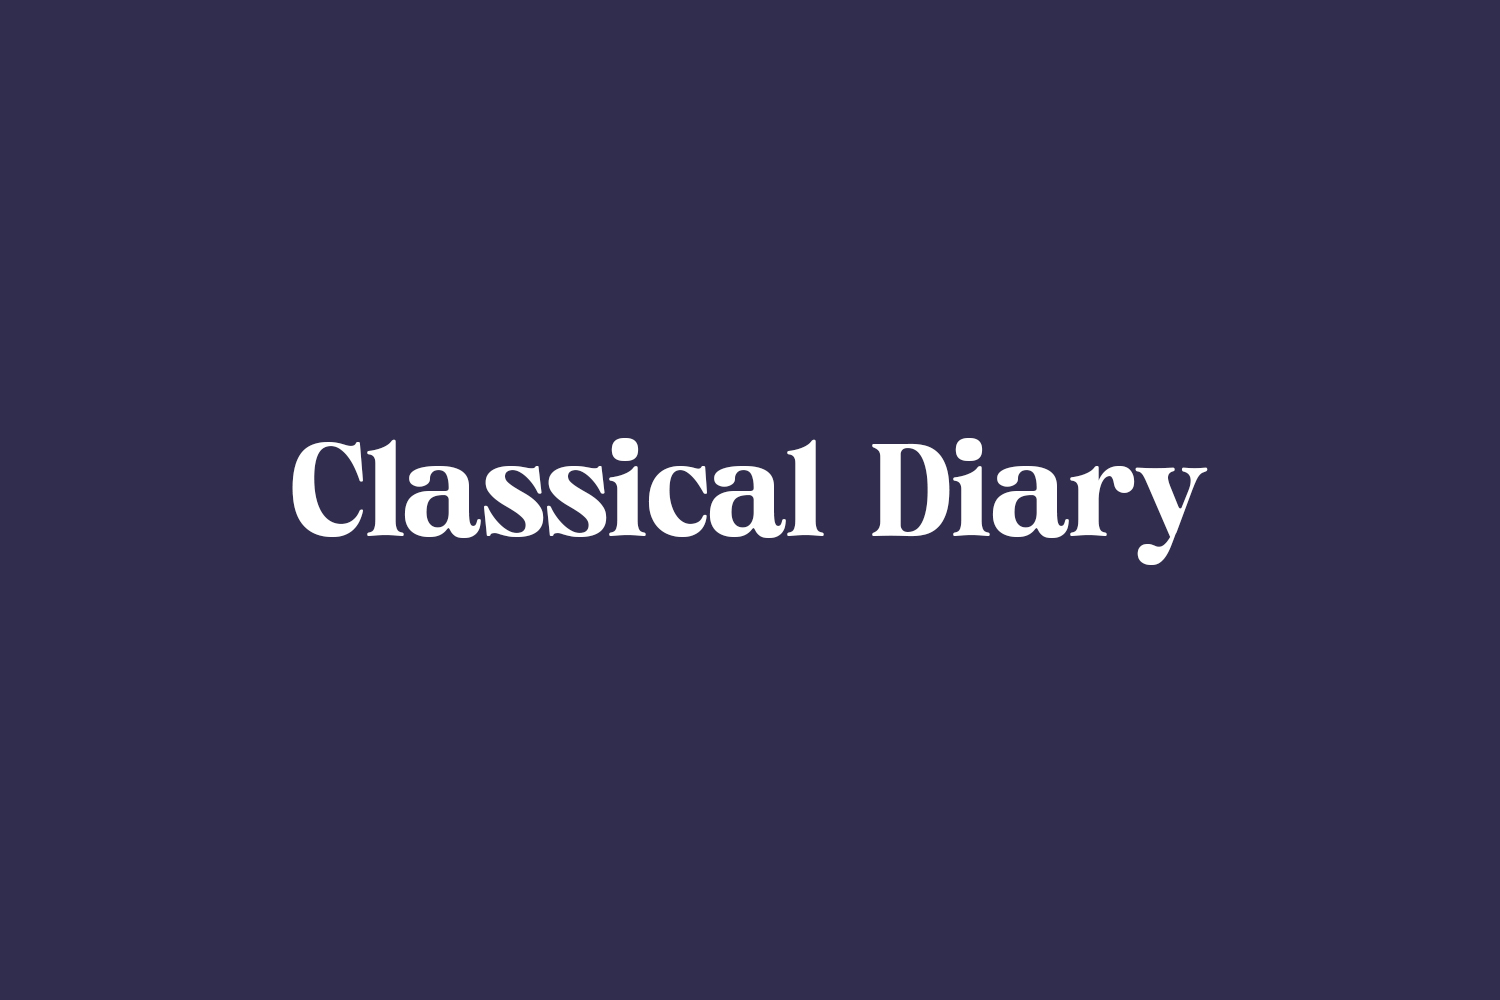 Classical Diary Free Font